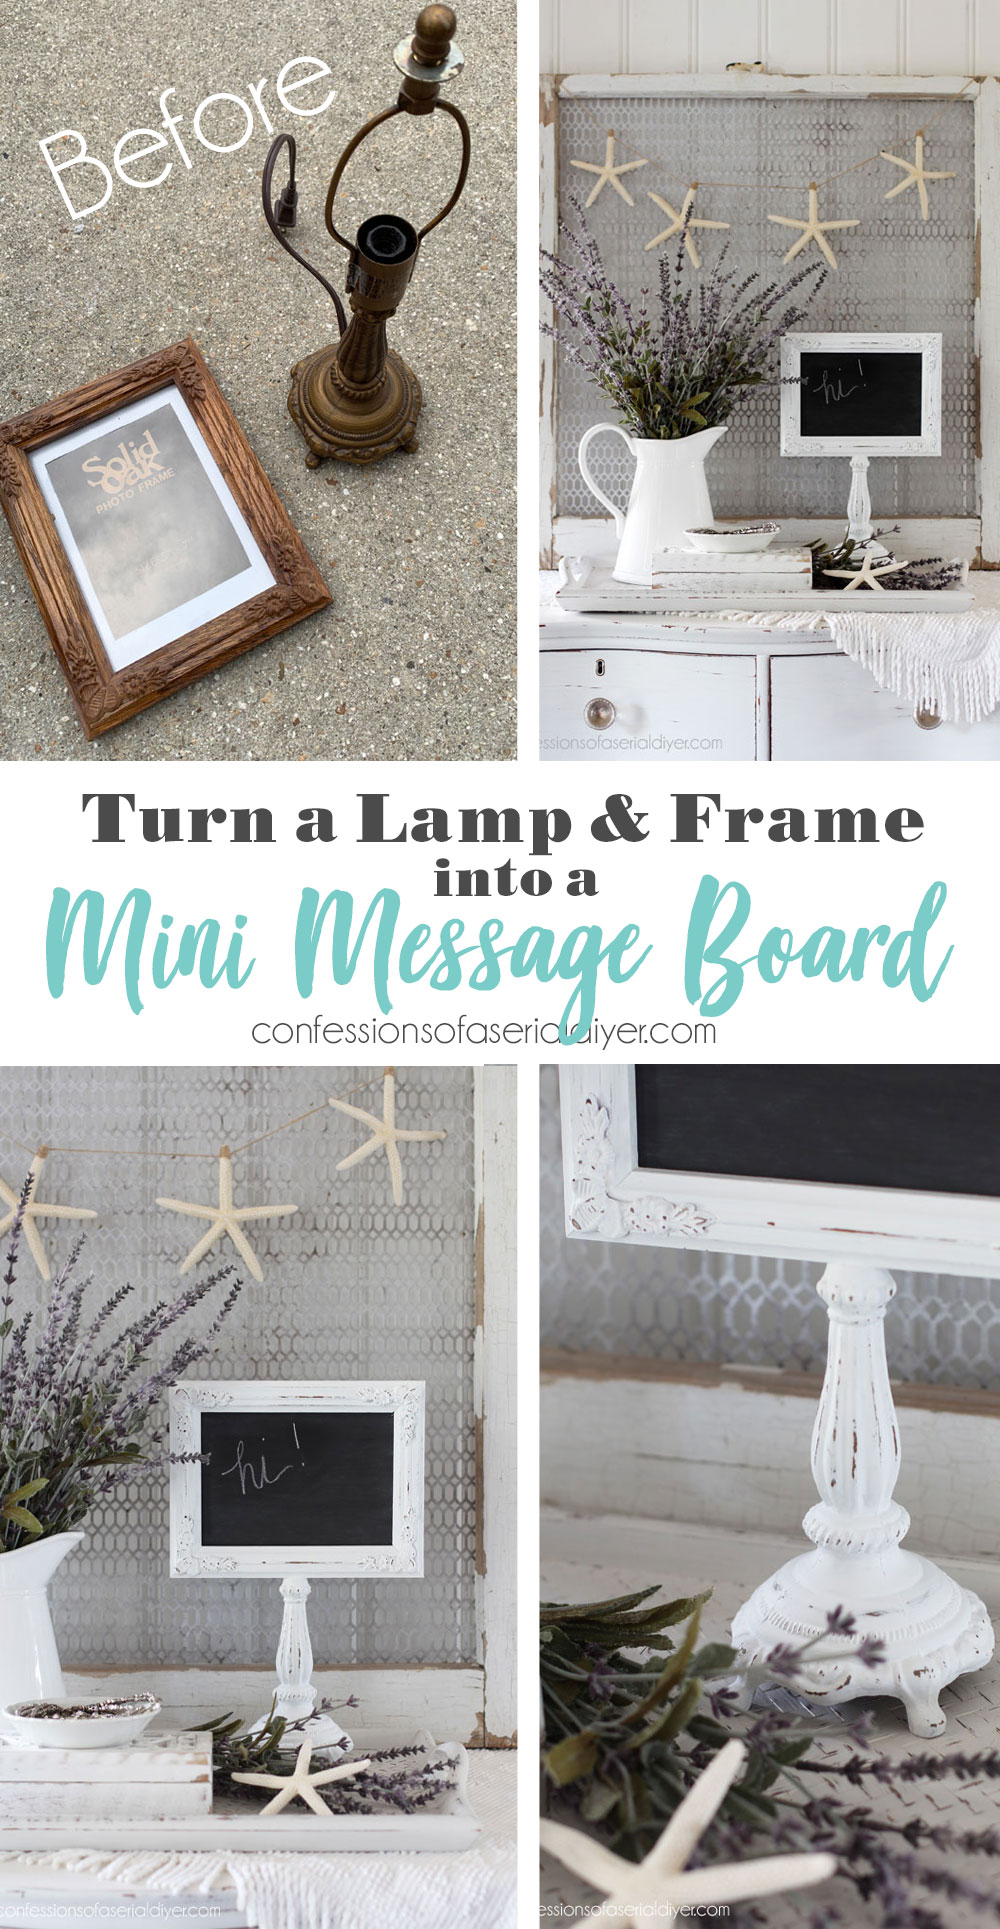 How to repurpose an Old Lamp